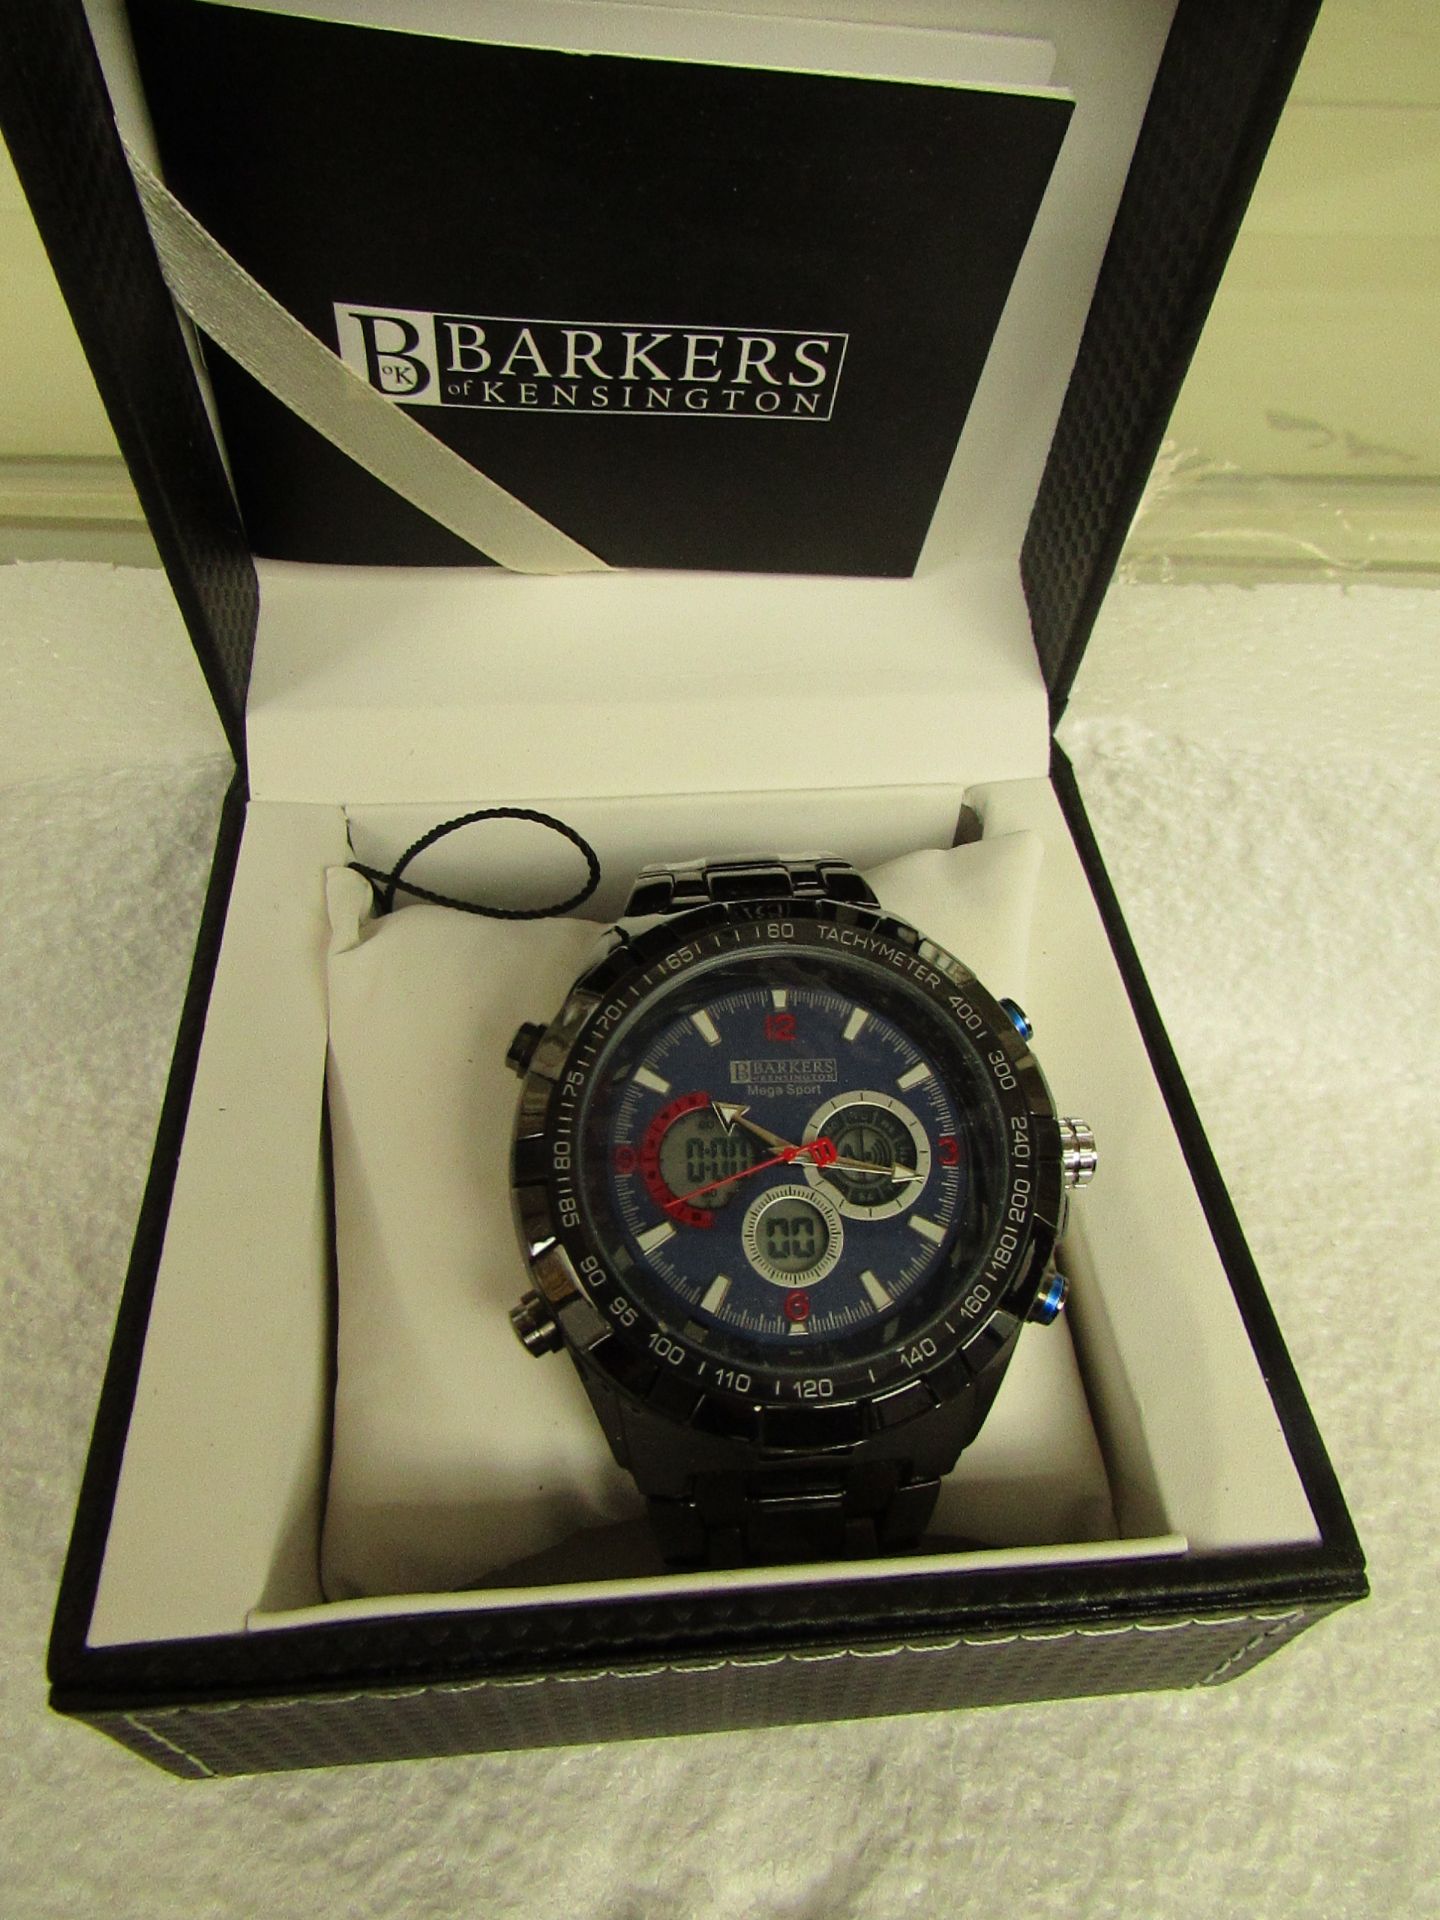 Barkers Of Kensington, Aero Sport Blue watch (SRP GBP425) Condition: Brand new with box, tags and